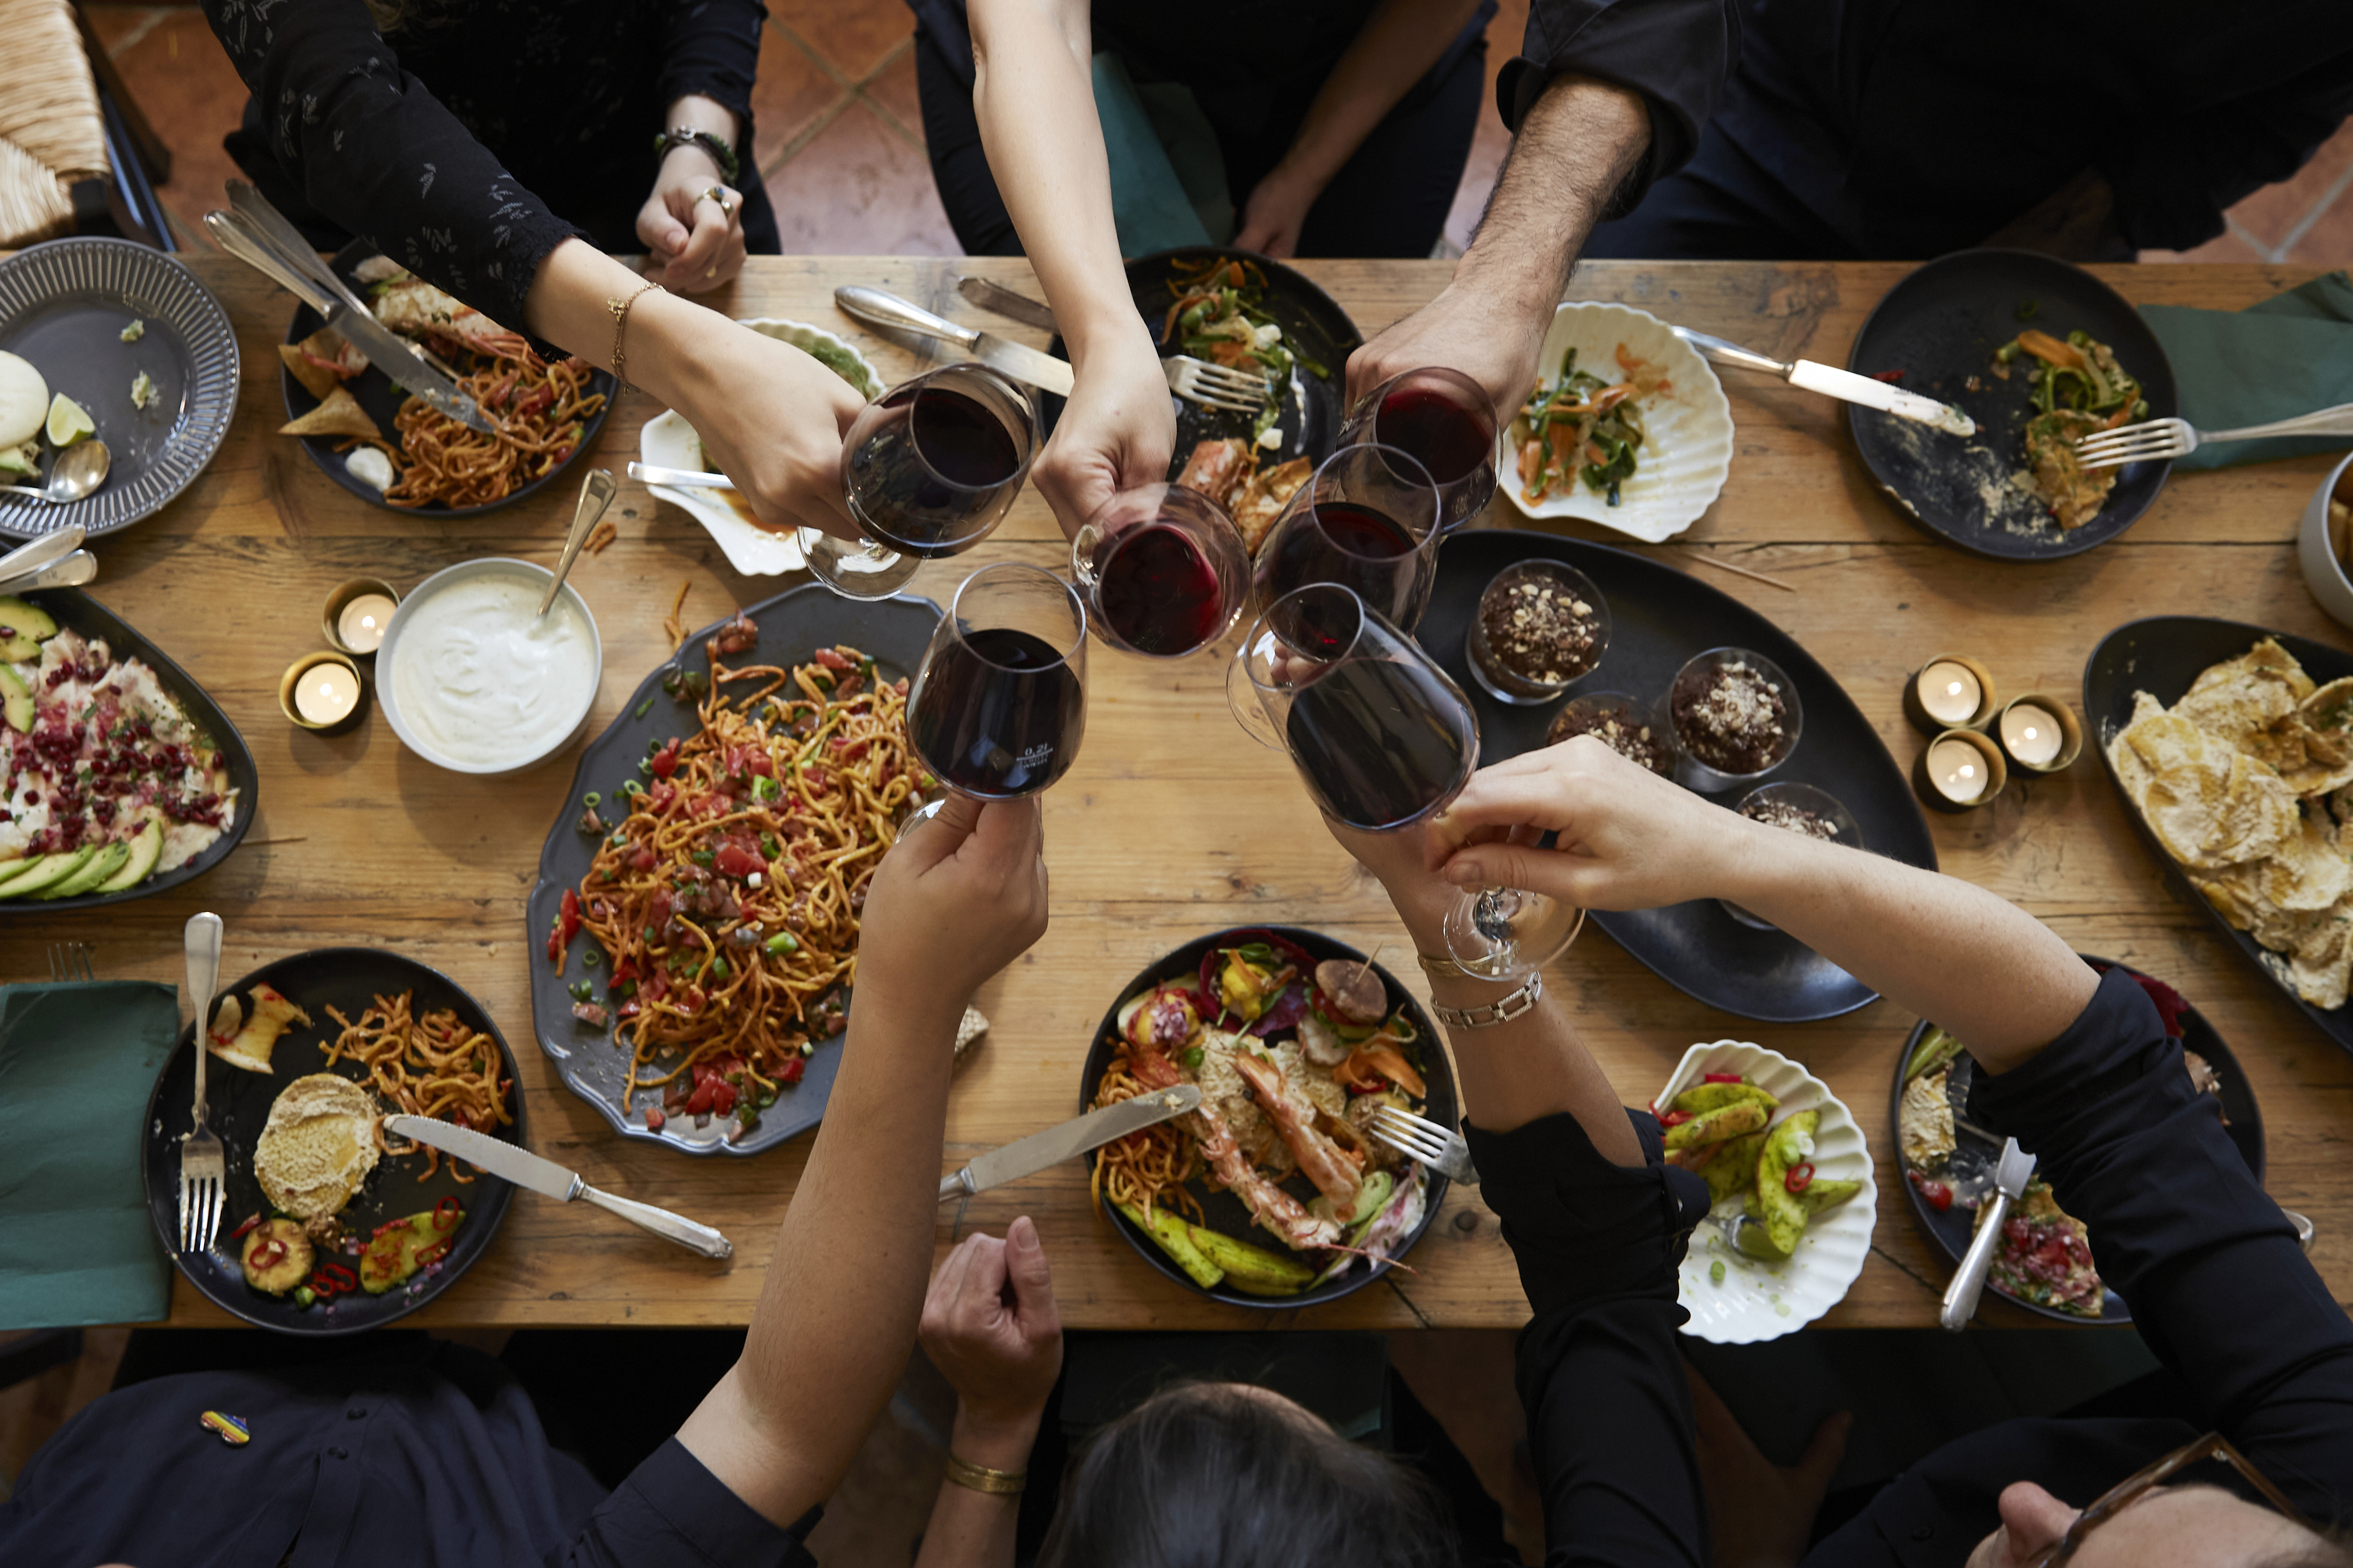 A dinner table seen from above with people toasting their glasses